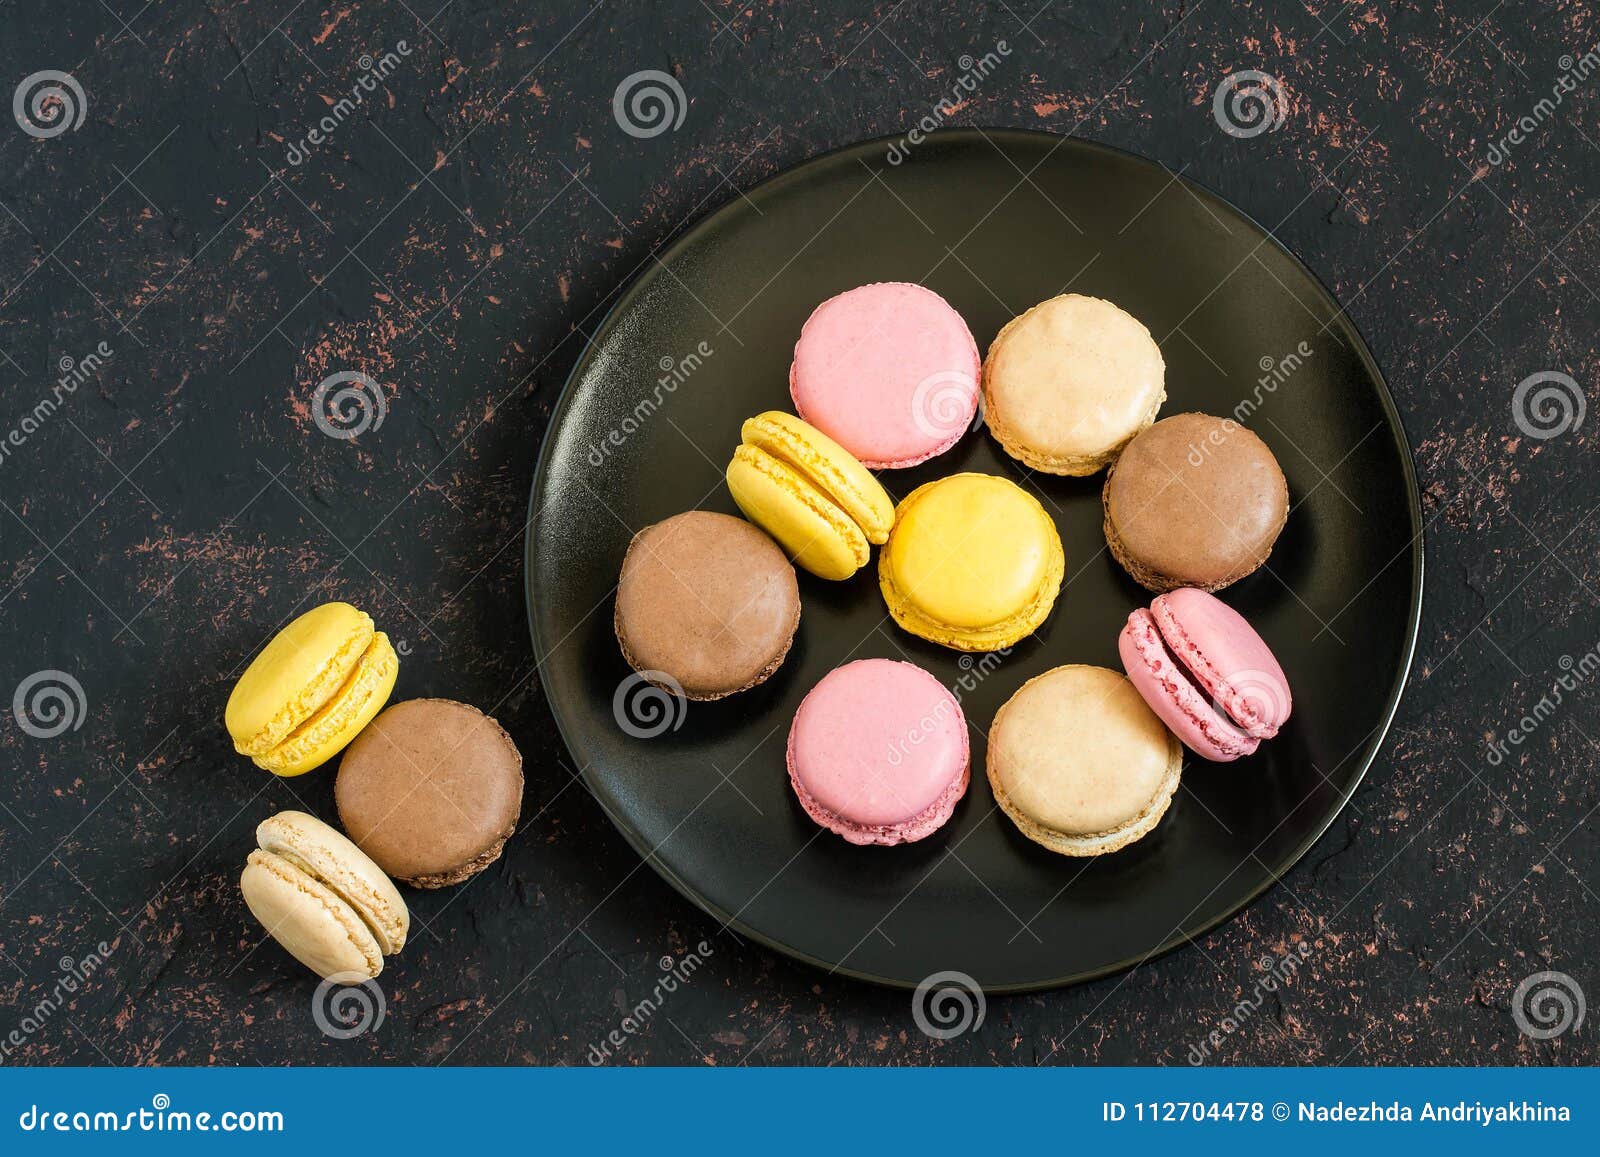 Different Macaroon on Black Plate Stock Photo - Image of delicate ...